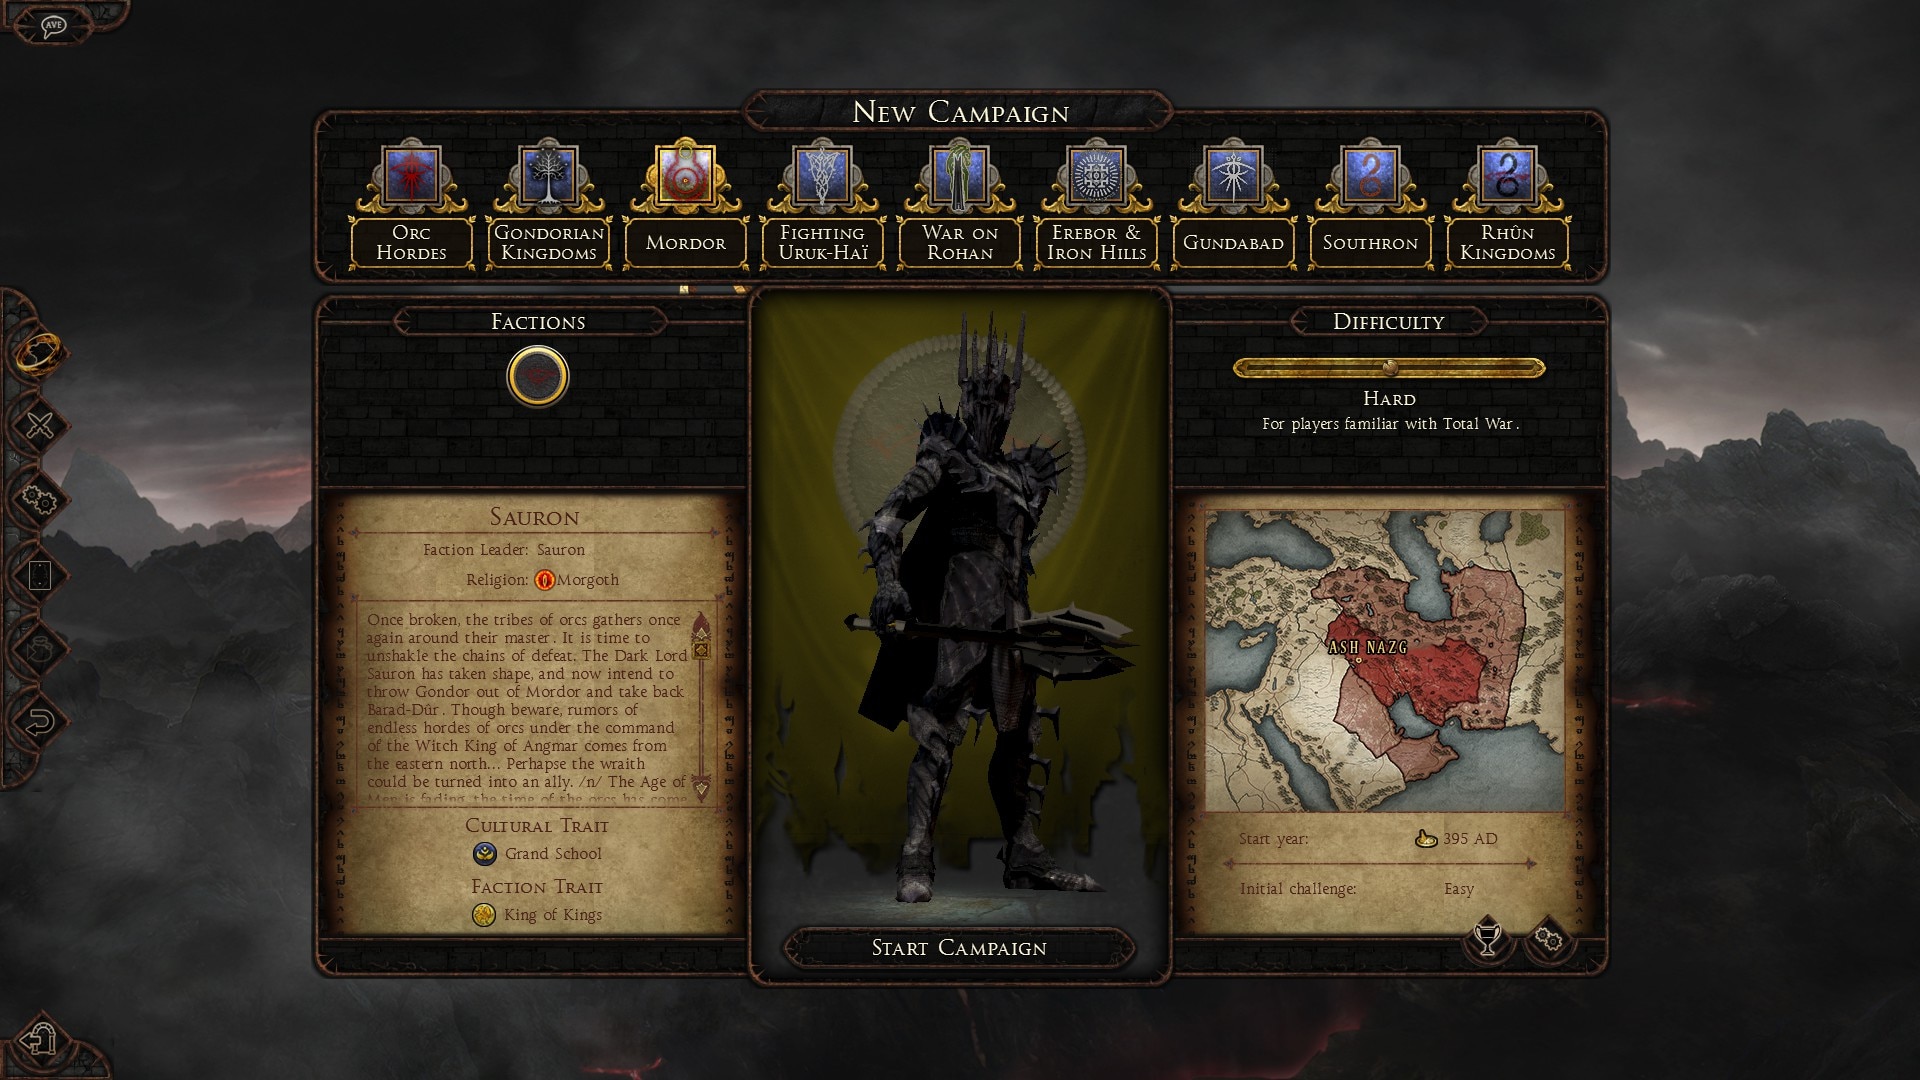 Glaurung (New version) image - Quenta Silmarillion mod for Rome: Total War  - Mod DB